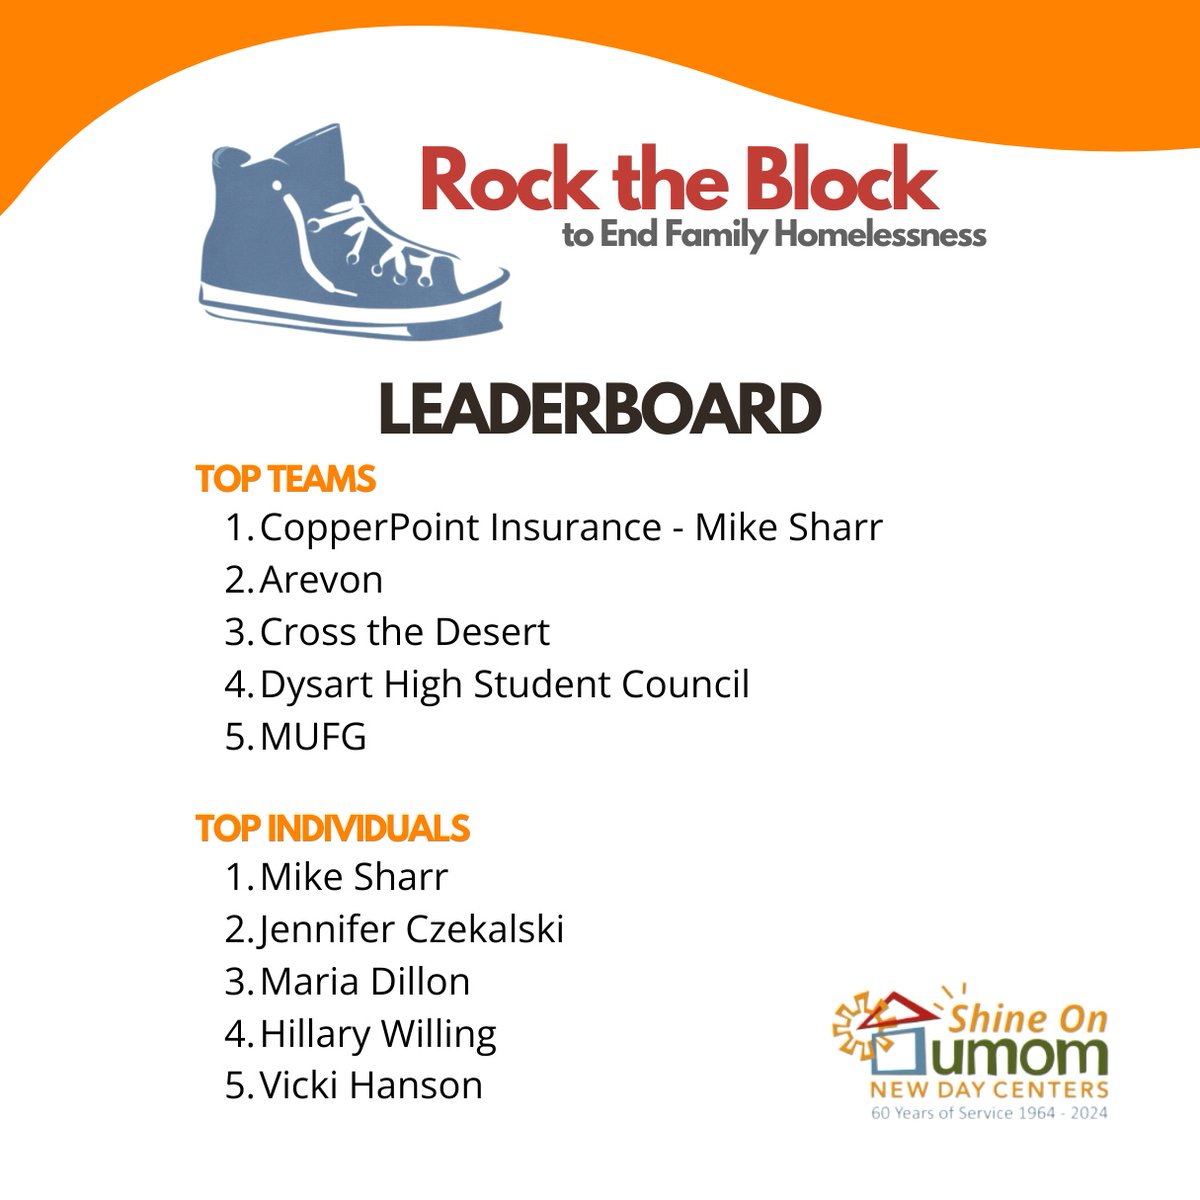 Want to get your name on the board? Every dollar you raise brings you closer to winning prizes & moves us closer to a world where everyone has a safe, stable place to call home.
Register as an individual or team at umom.org/zoo
 #UMOMWalk #EndHomelessness #Charity